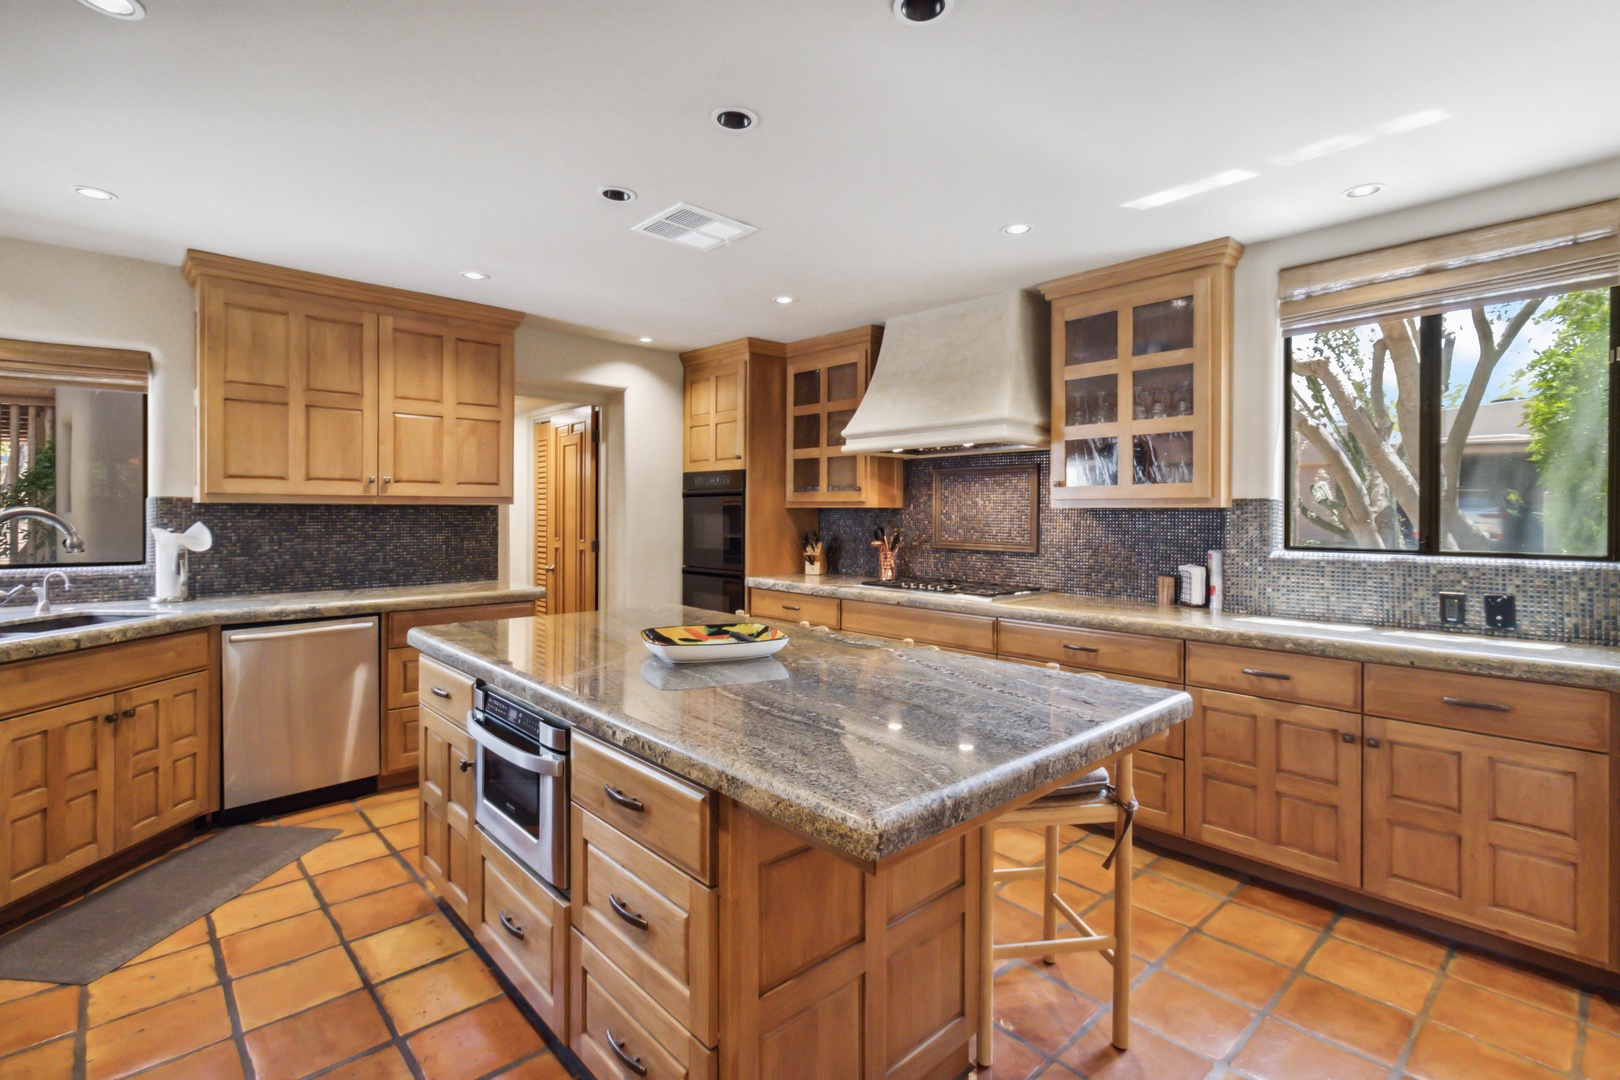 Scottsdale Vacation Rentals, Boulders Hideaway Villa - Kitchen island gives you enough space to prep and chat with friends